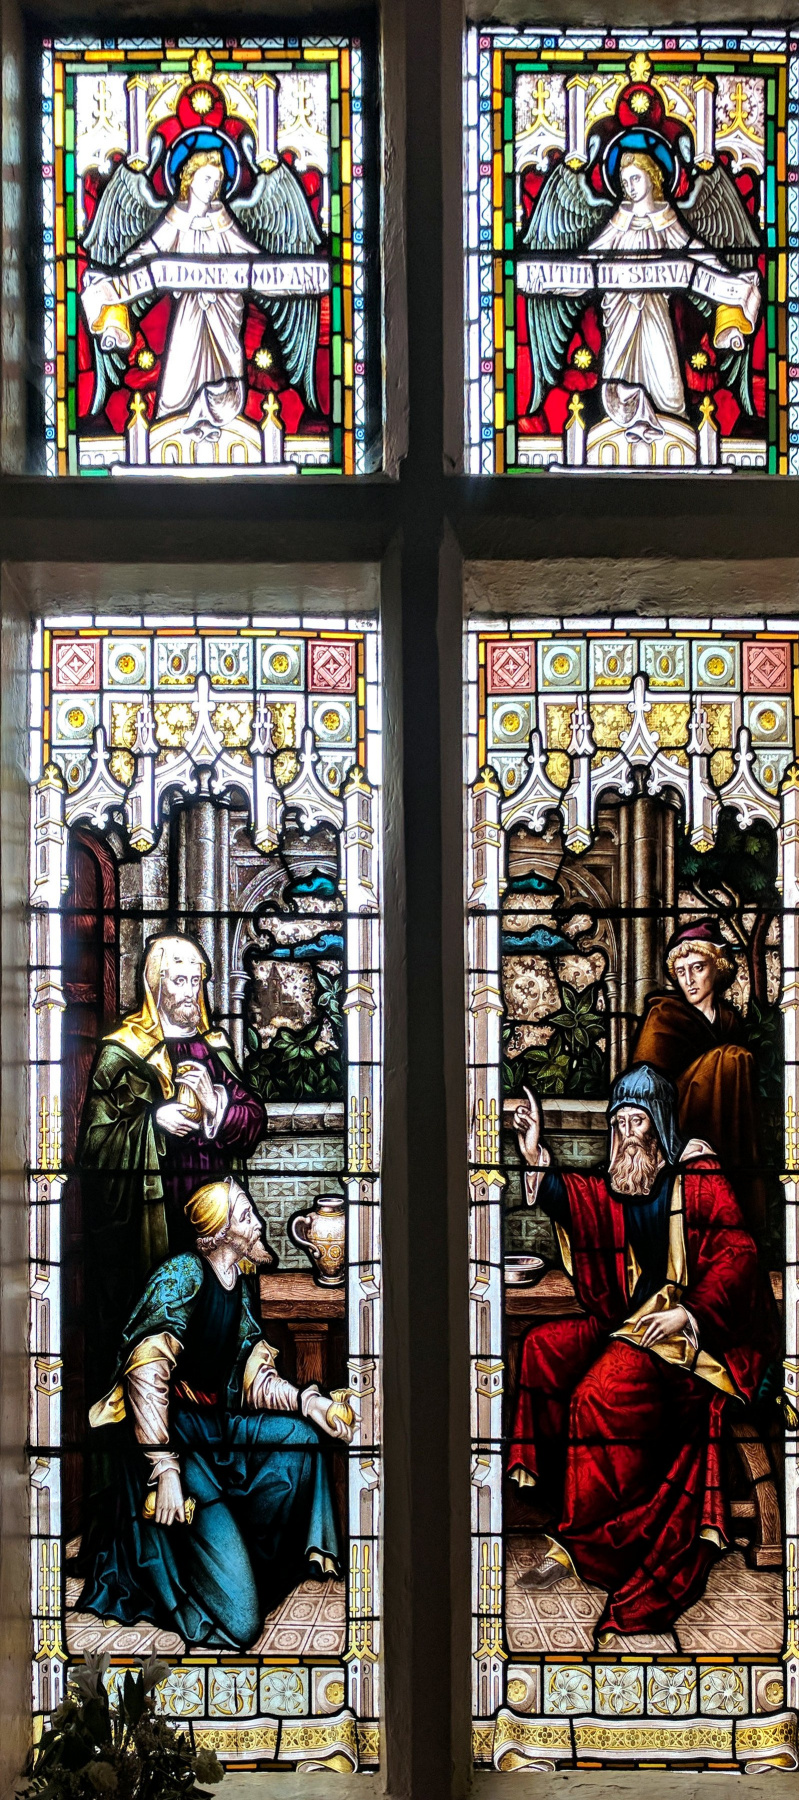 William Morris. Stained glass window in the Old House of Assembly, Mansfield, Nottinghamshire